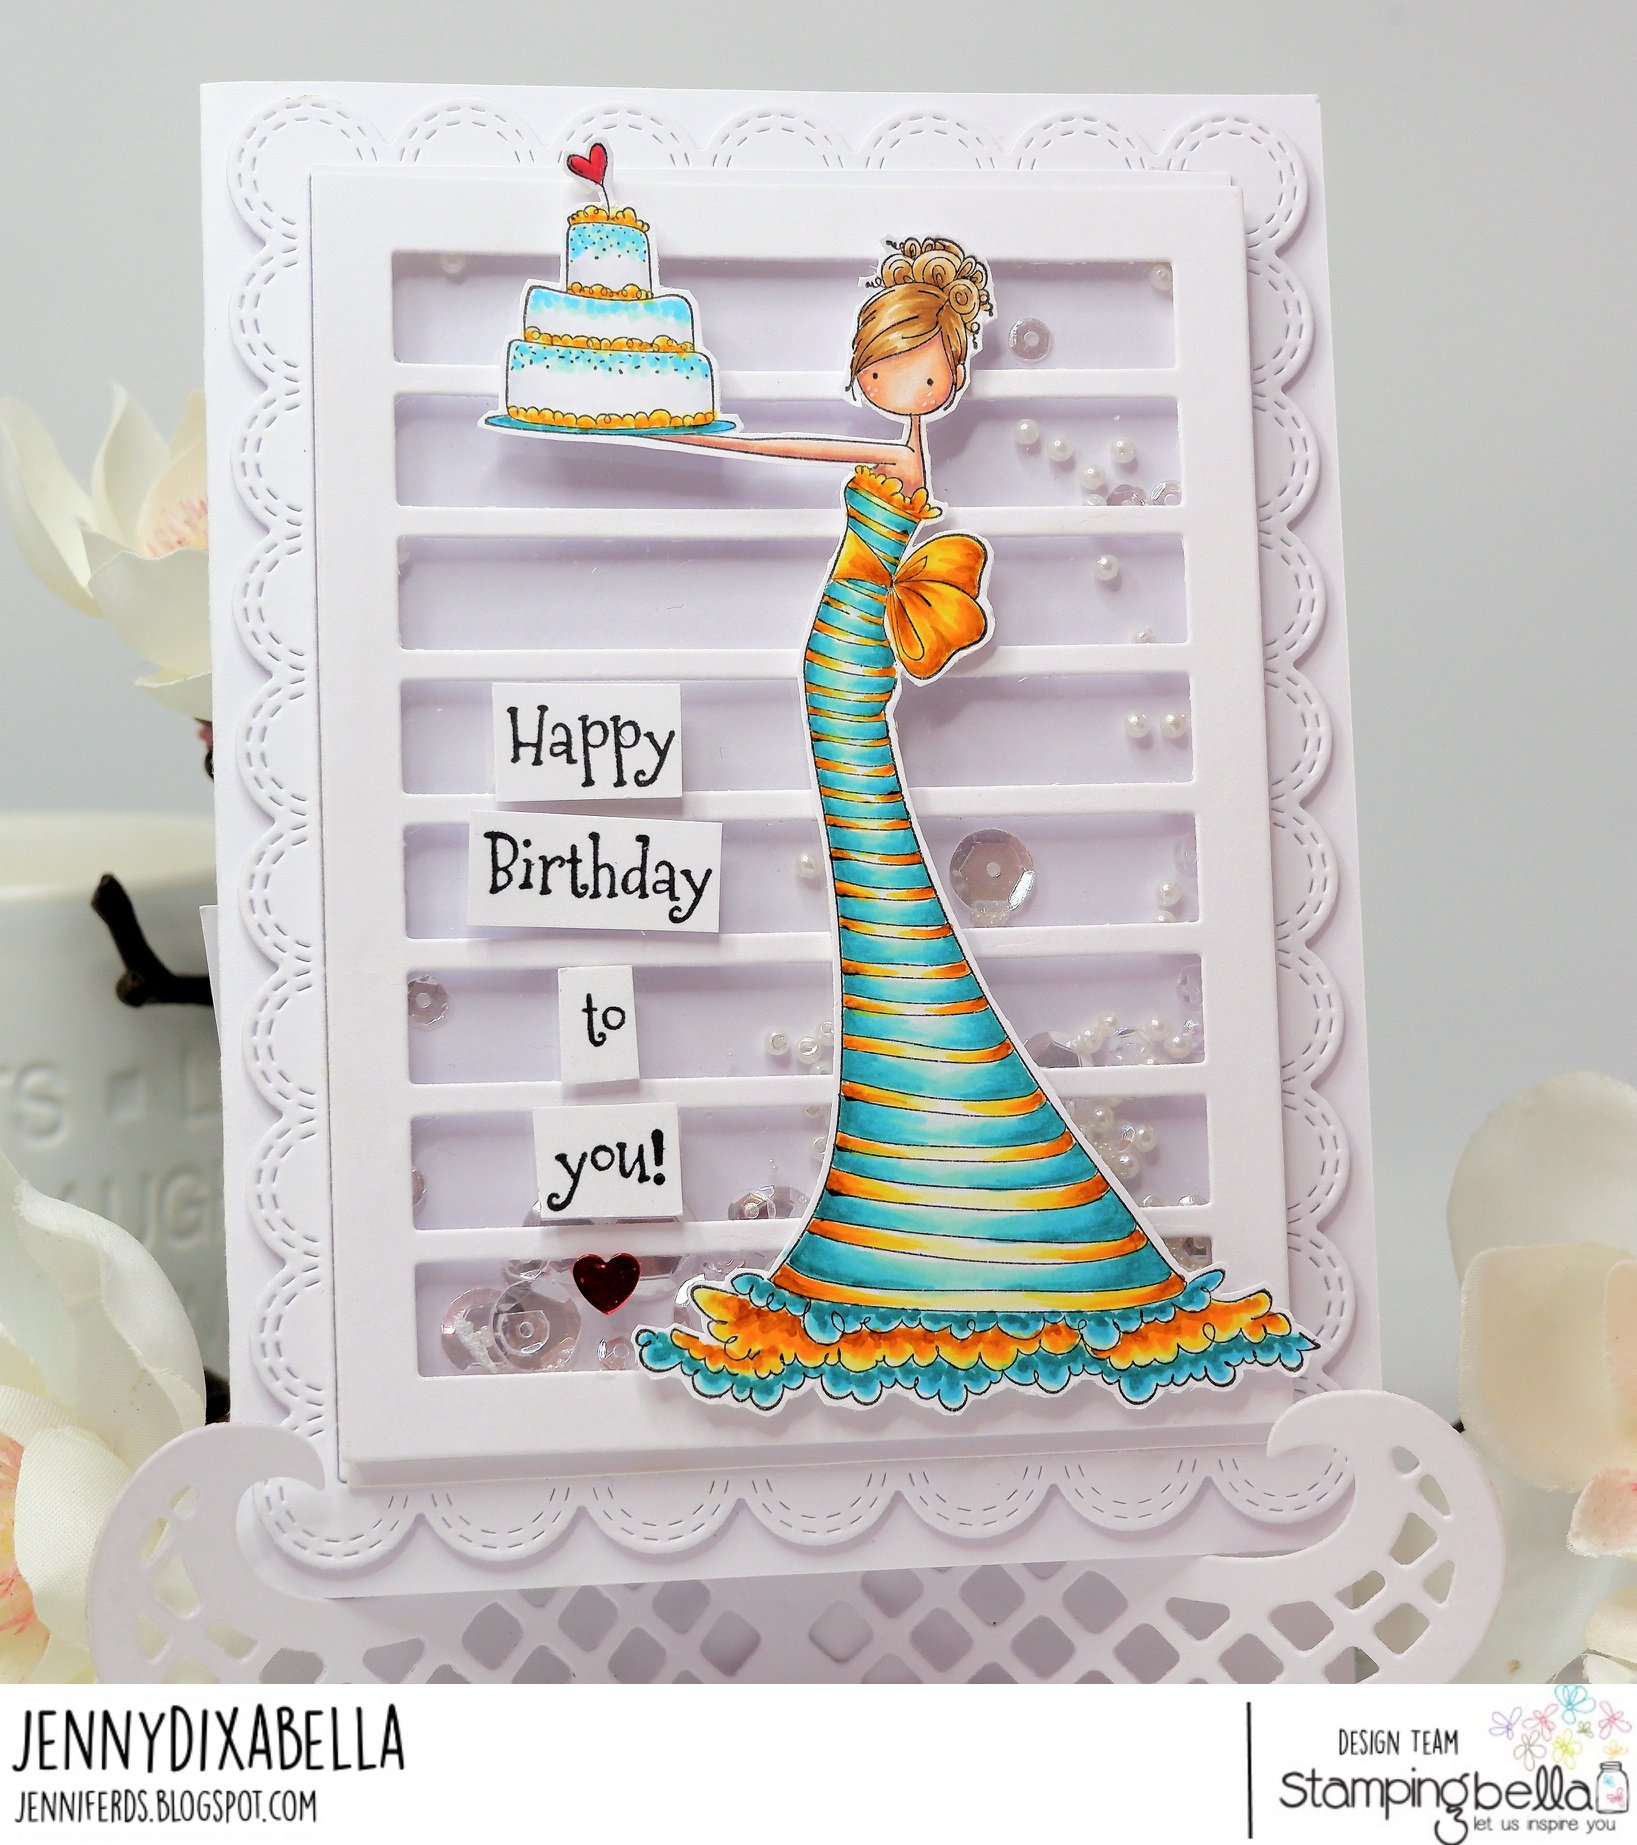 www.stampingbella.com: rubber stamp used: Uptown girl BRITTANY the BIRTHDAY GIRL. card by Jenny Dix